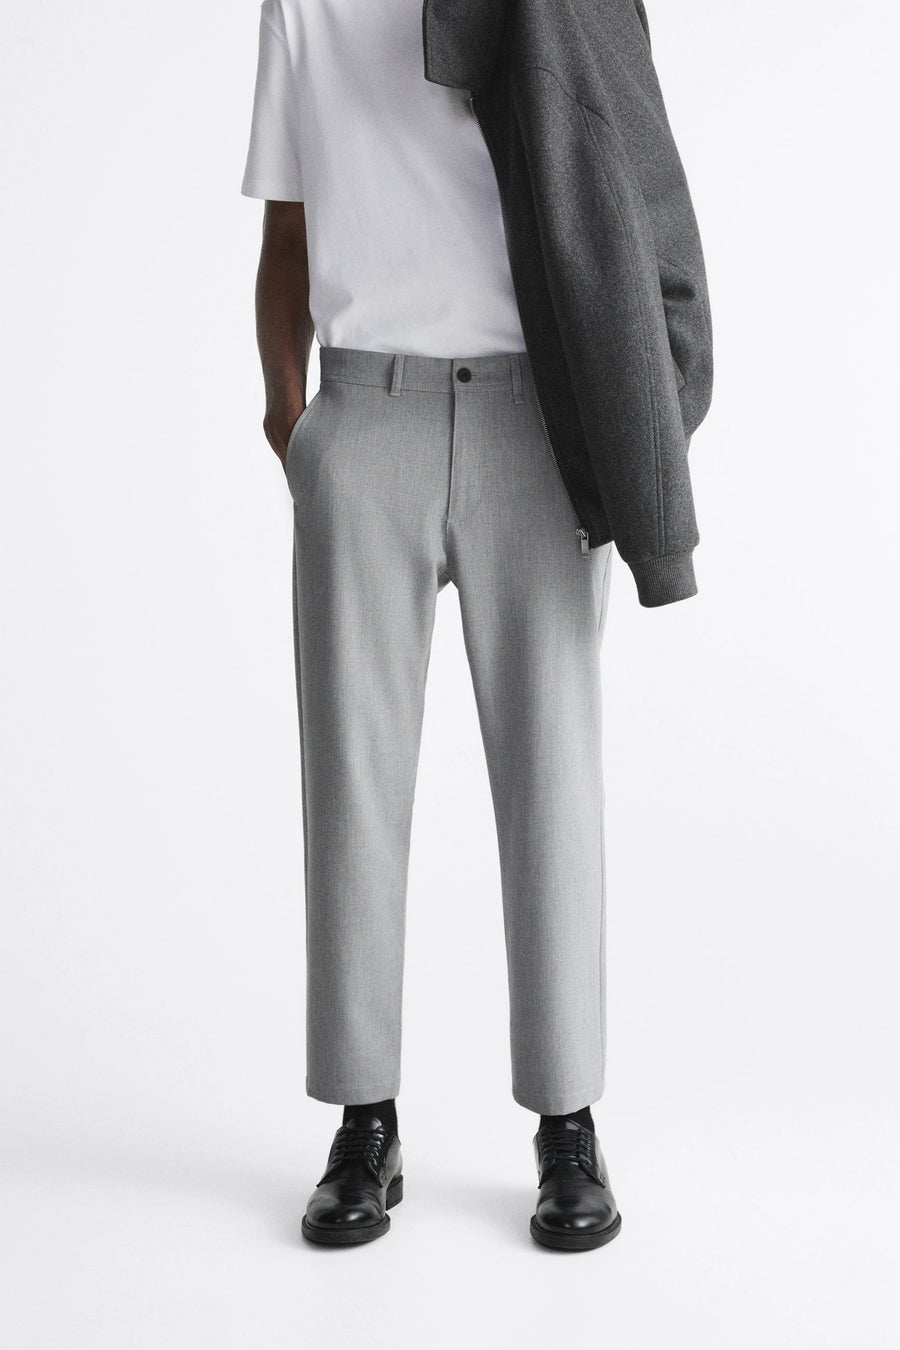 TEXTURED COMFORT TROUSERS 016